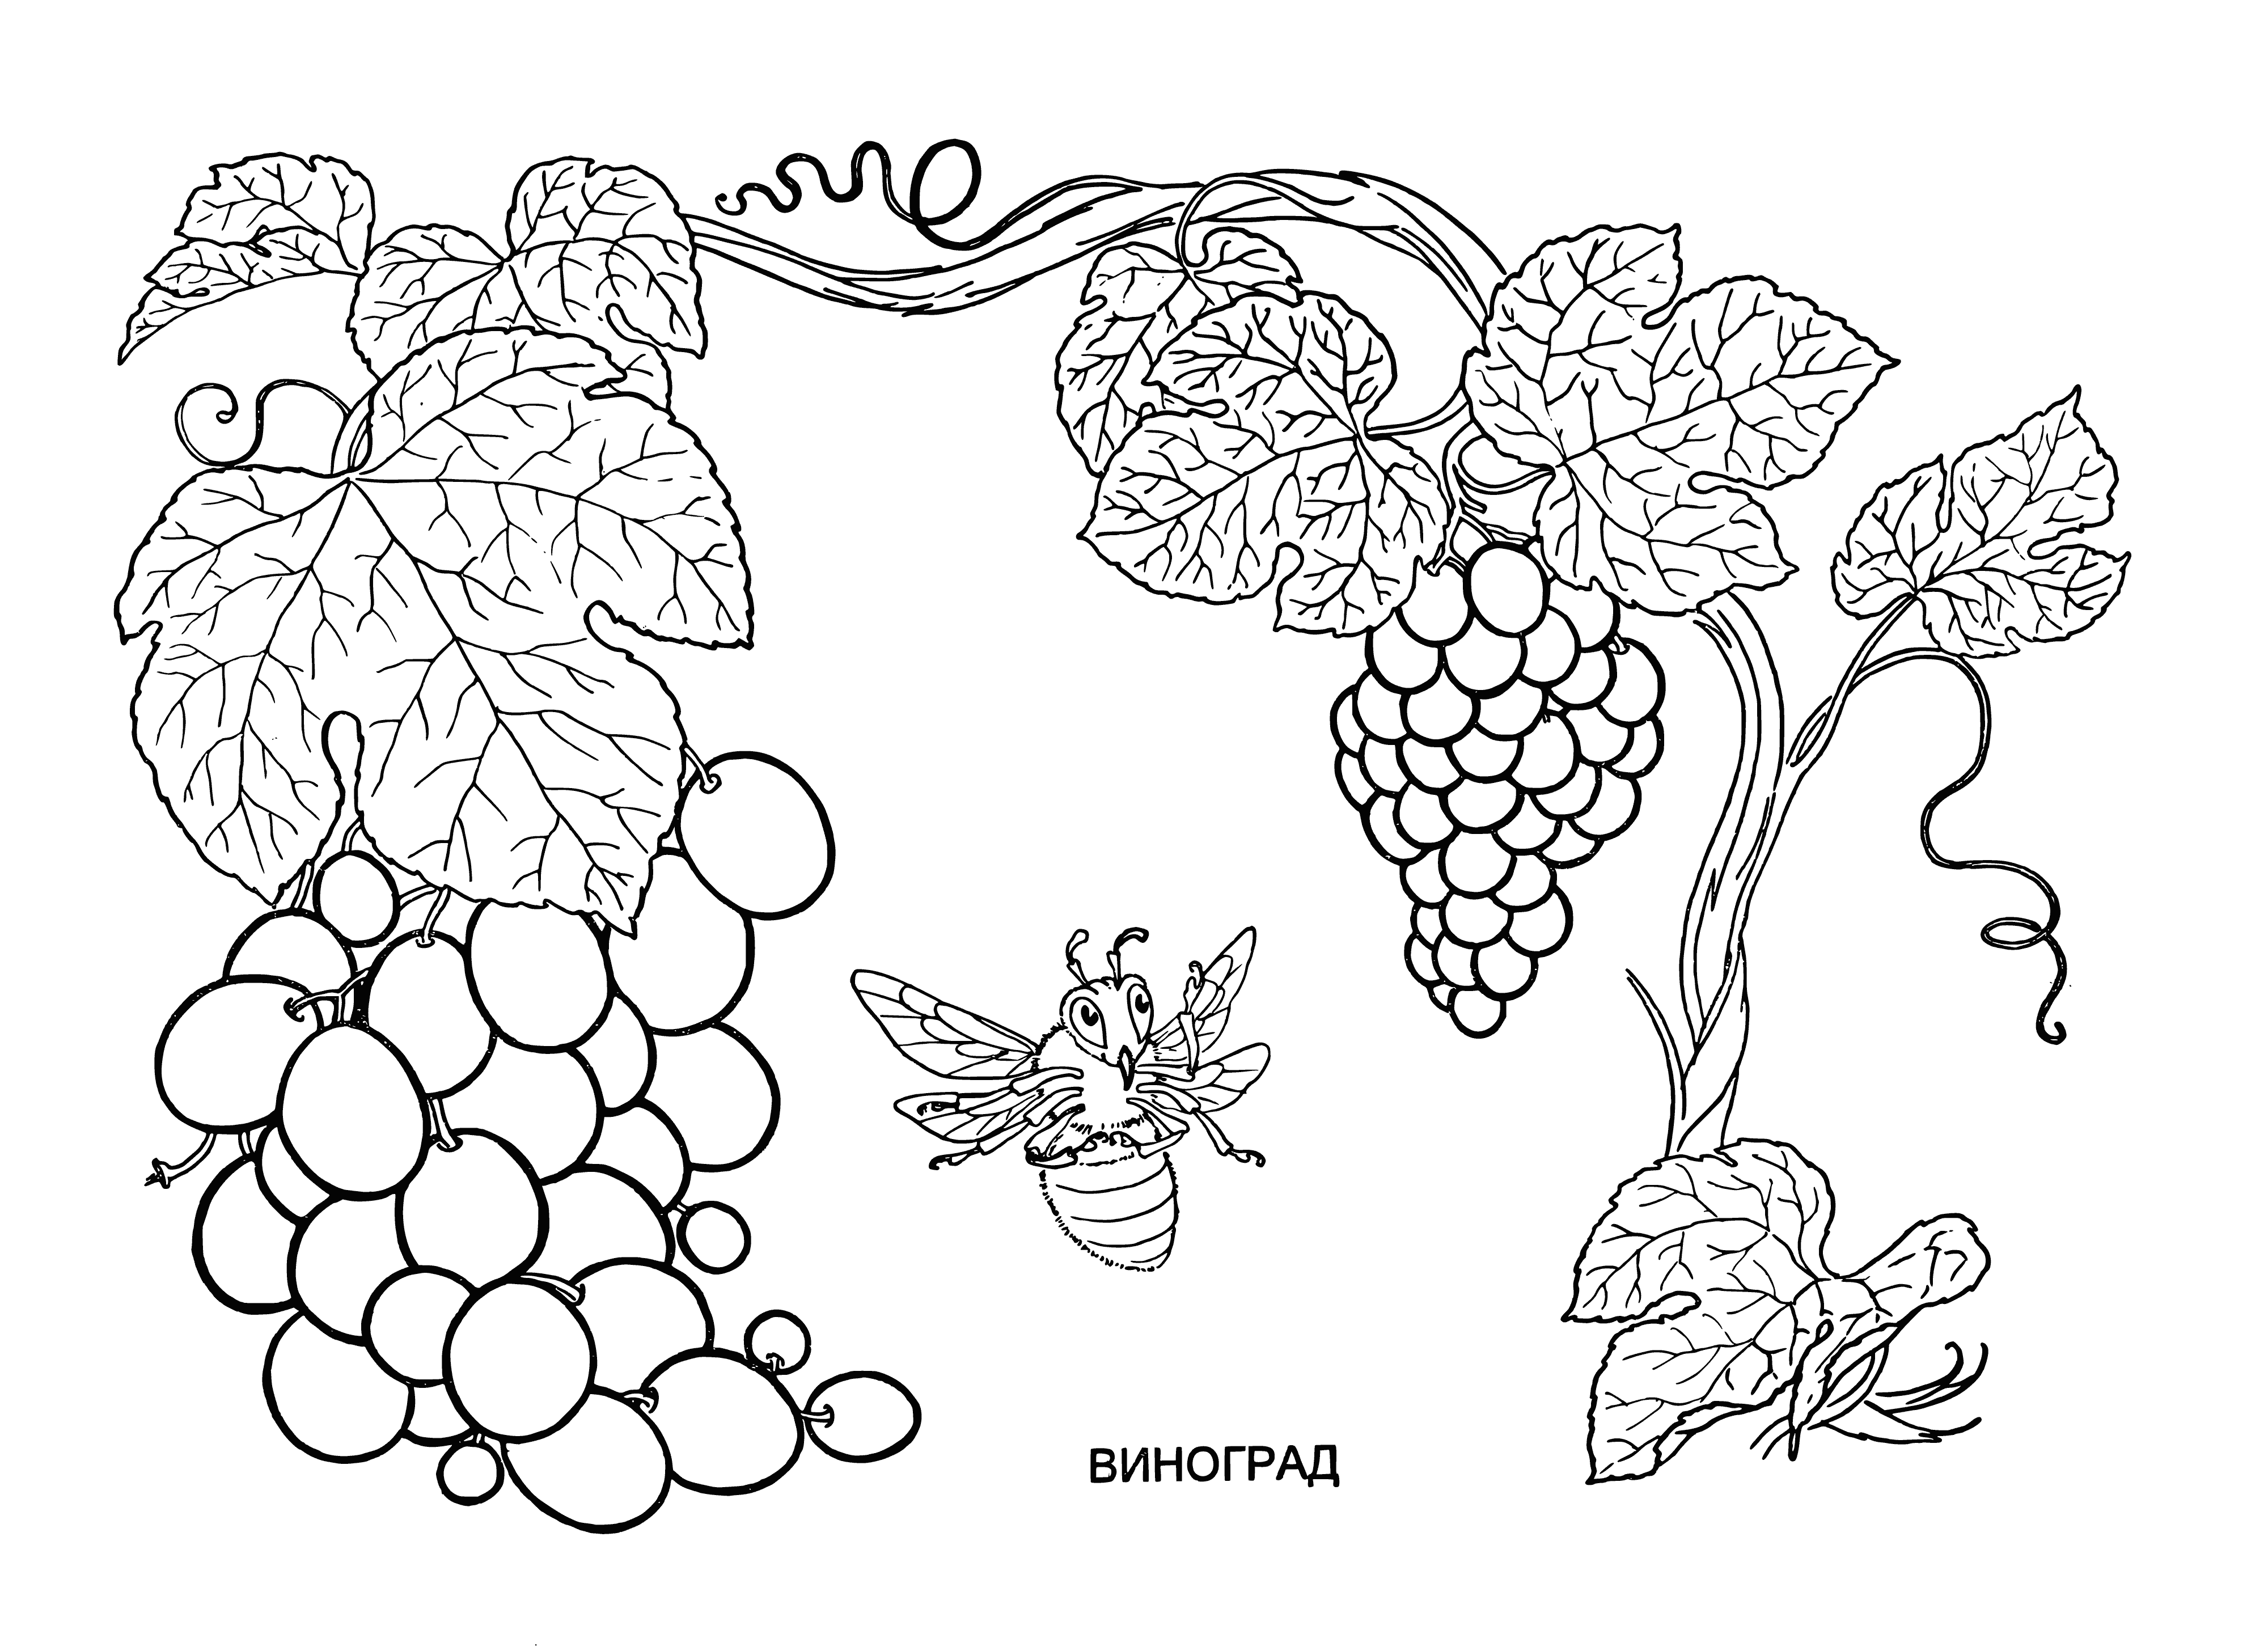 coloring page: Grape vines with entangled leaves & vines bearing green grapes in a vineyard section. #nature